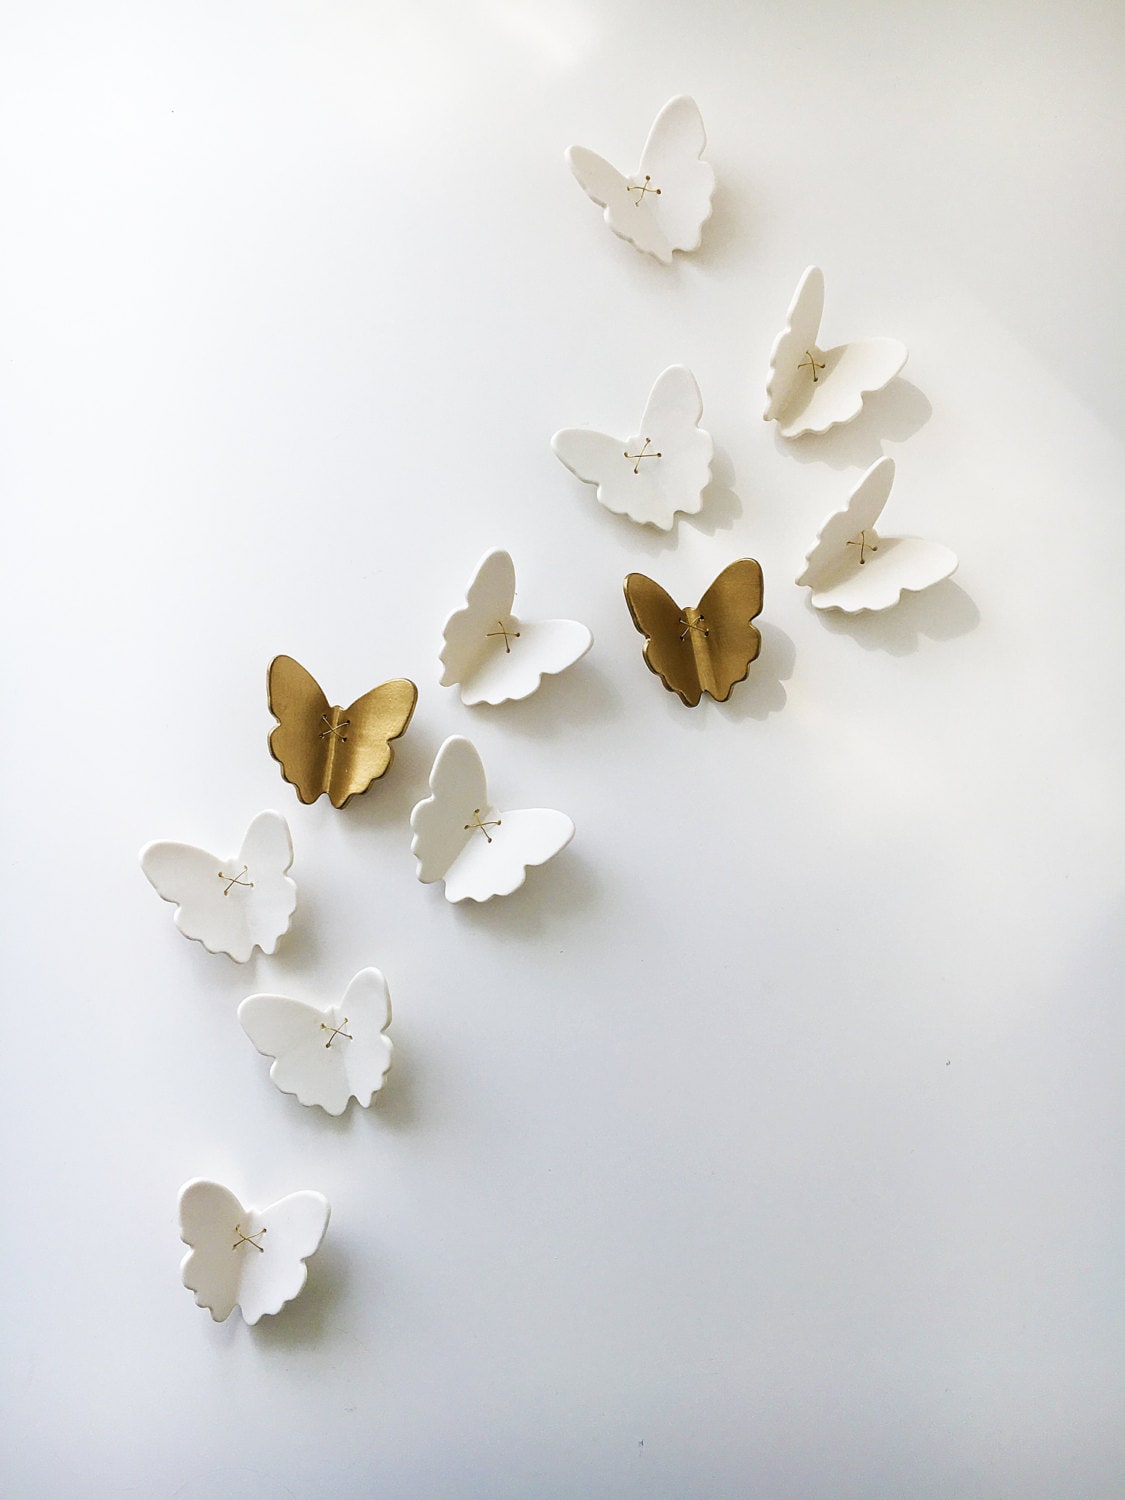 3D Butterfly wall art Gold & white porcelain ceramic butterflies Large wall art Wall sculpture Set of 11 with metal wire (9 white + 2 gold)